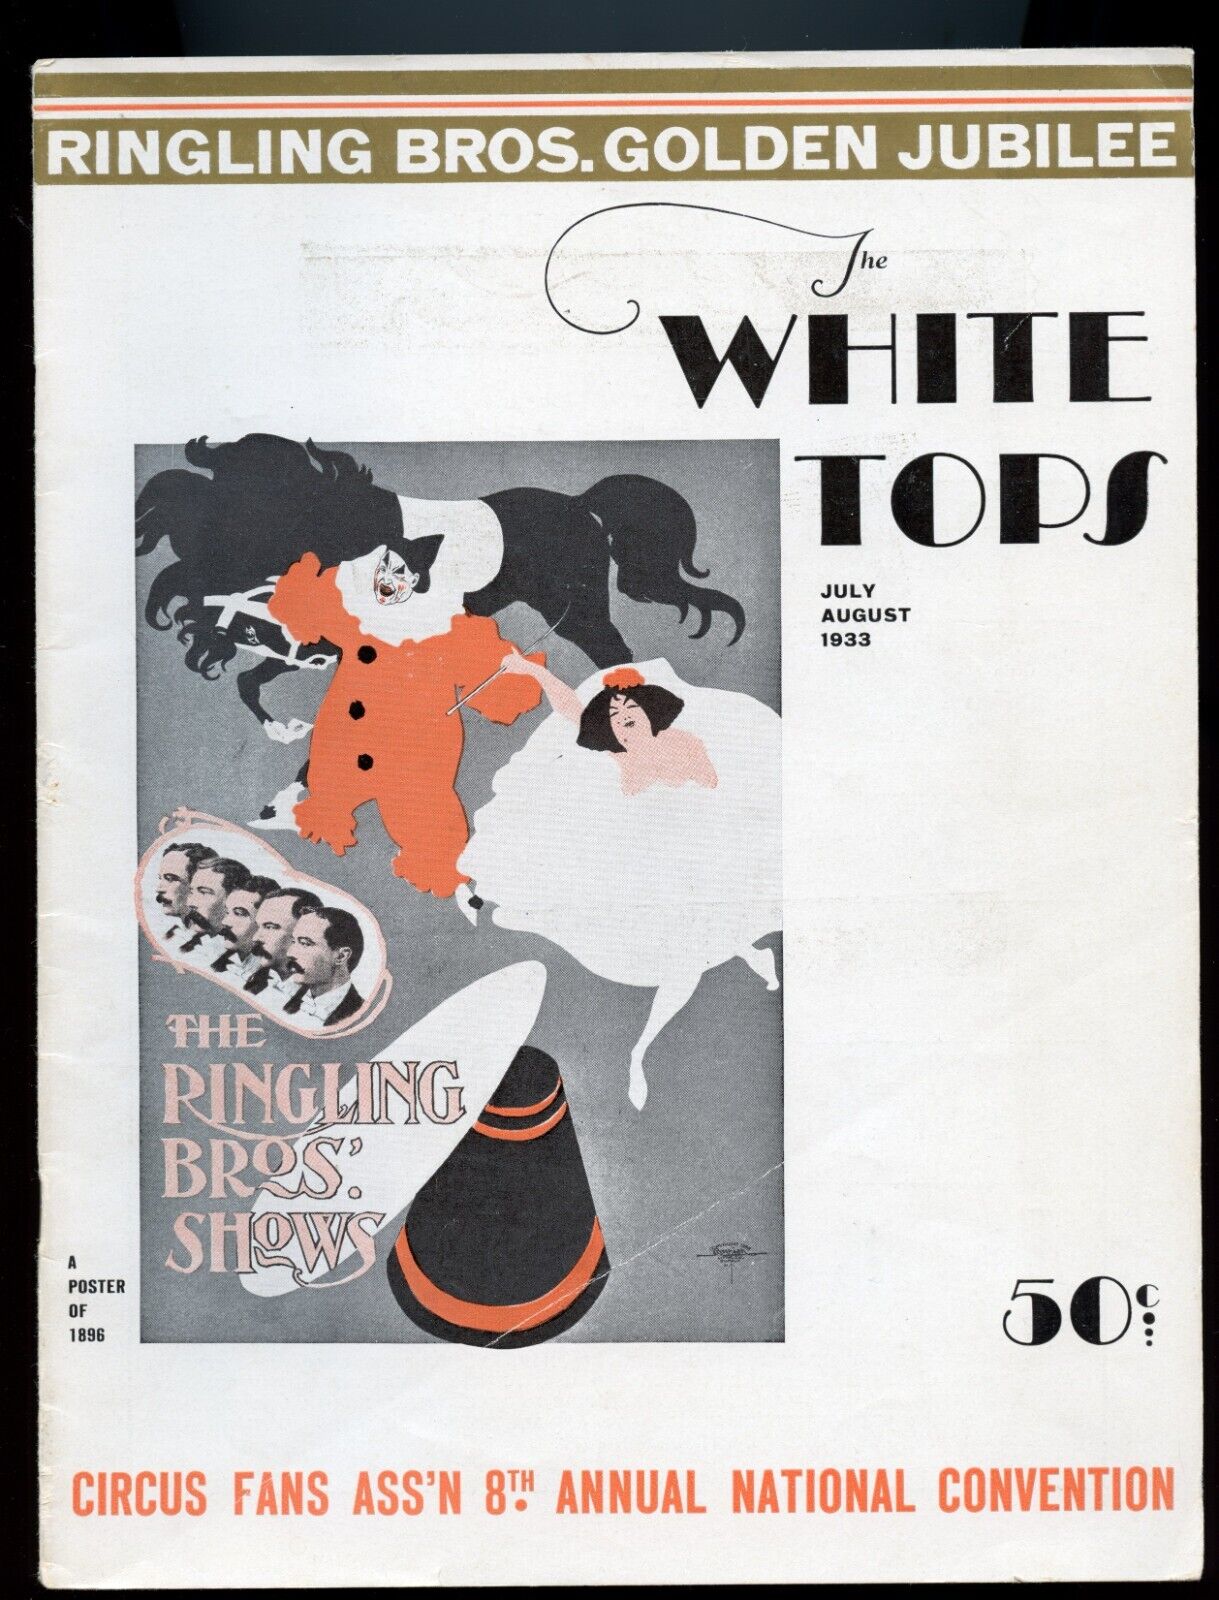 CFA White Tops Magazine July 1933 Ringling Bros. Circus Golden Jubilee Issue